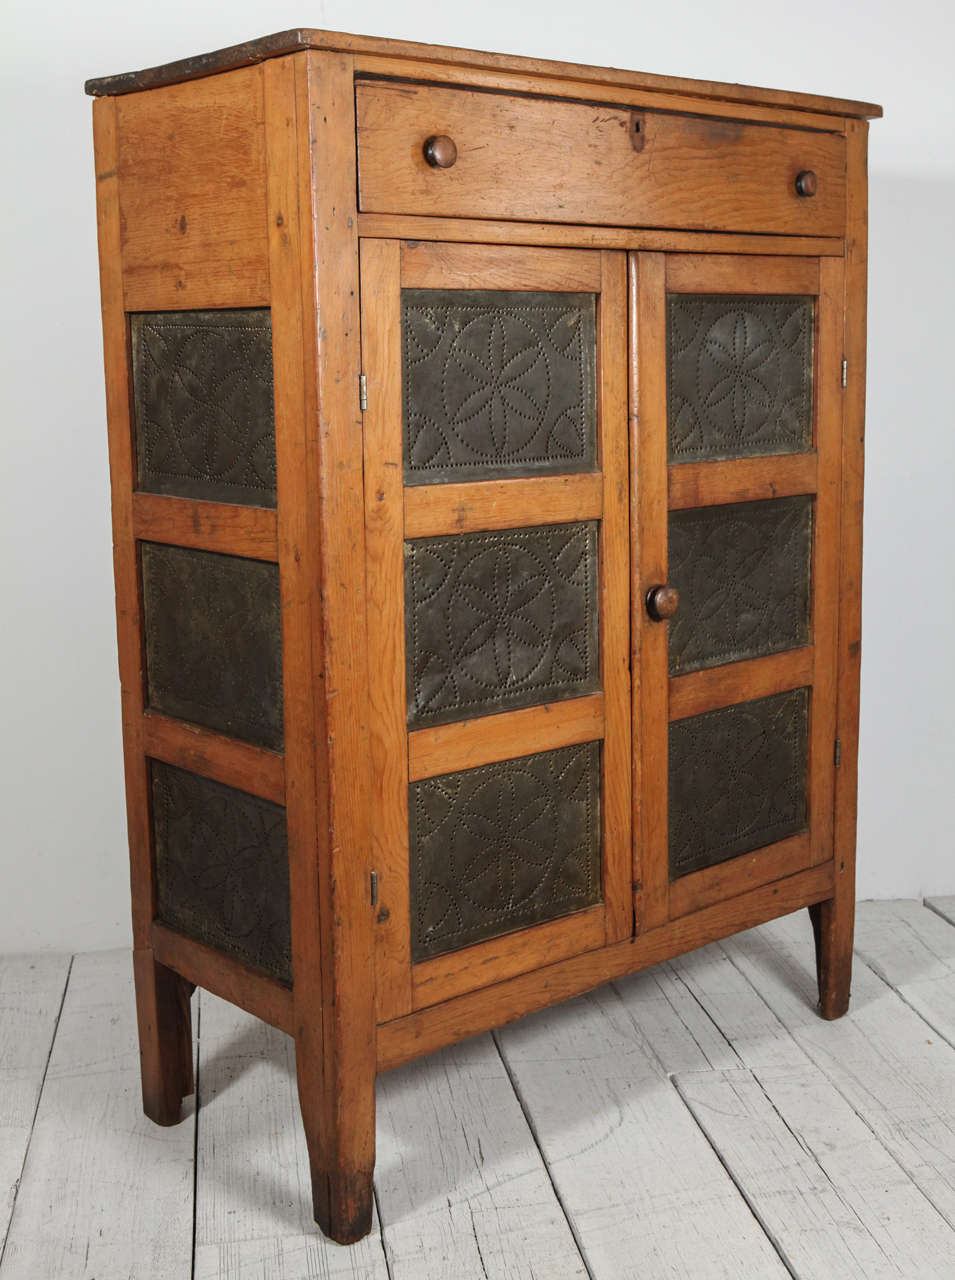 Rustic pie safe in antique condition. Doors and sides have three decoratively perforated ventilation panels.